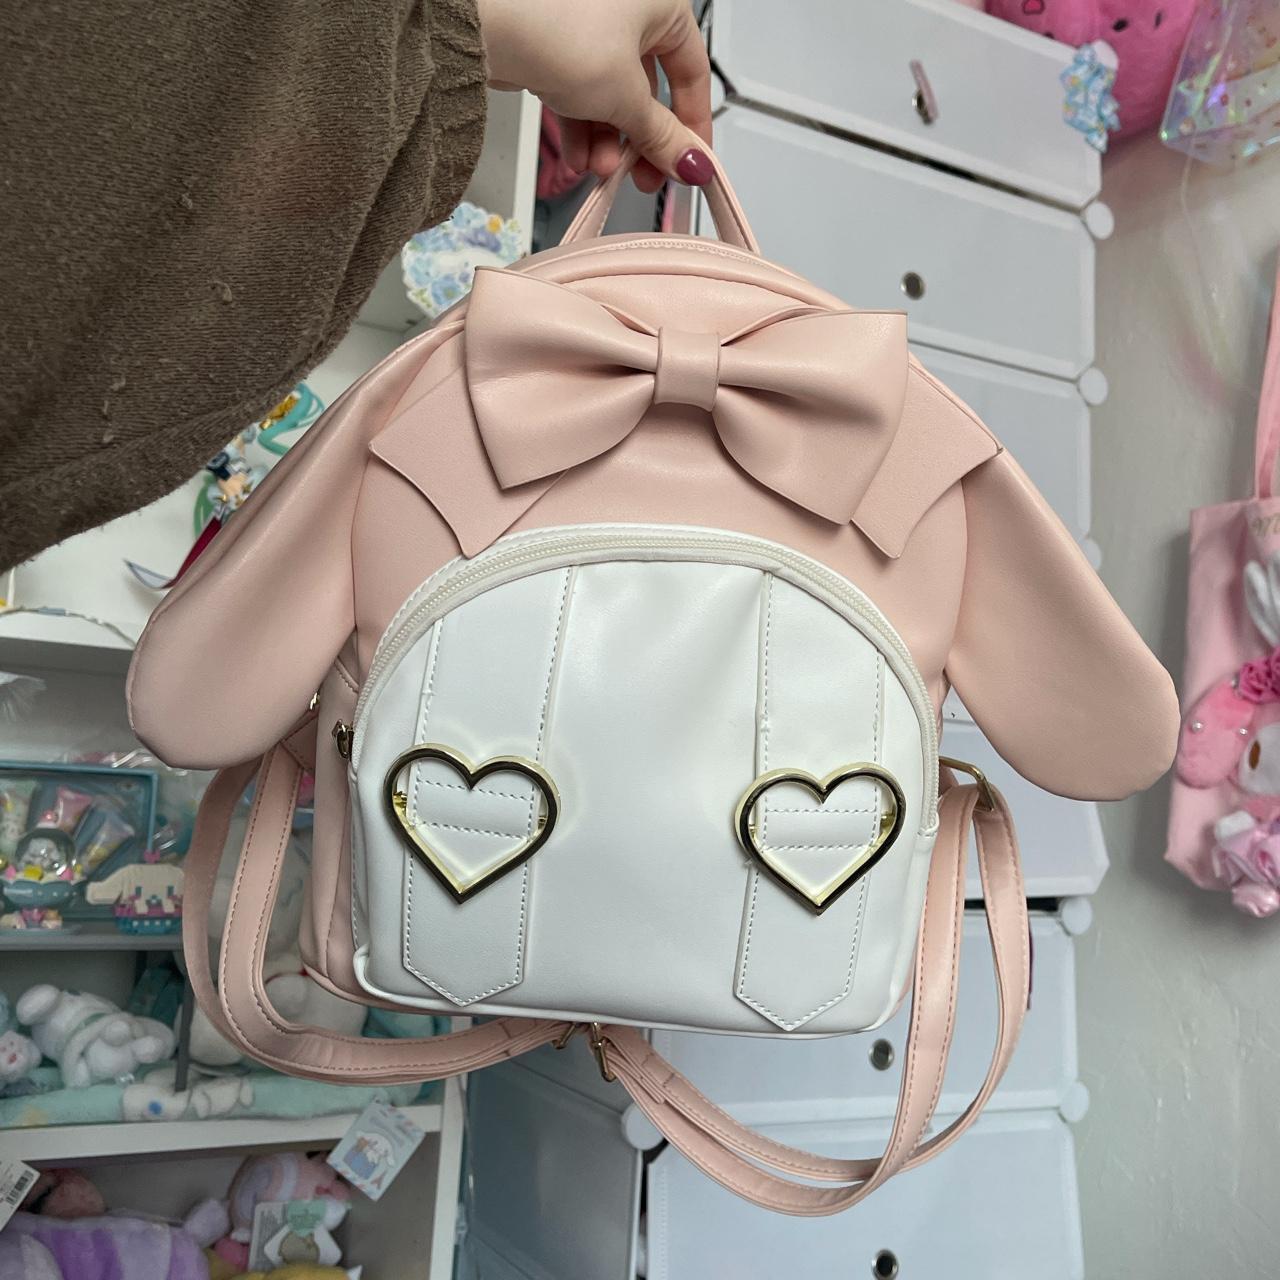 Mymelody x DearMyLove Sanrio Backpack 🌸 Rare and in... - Depop